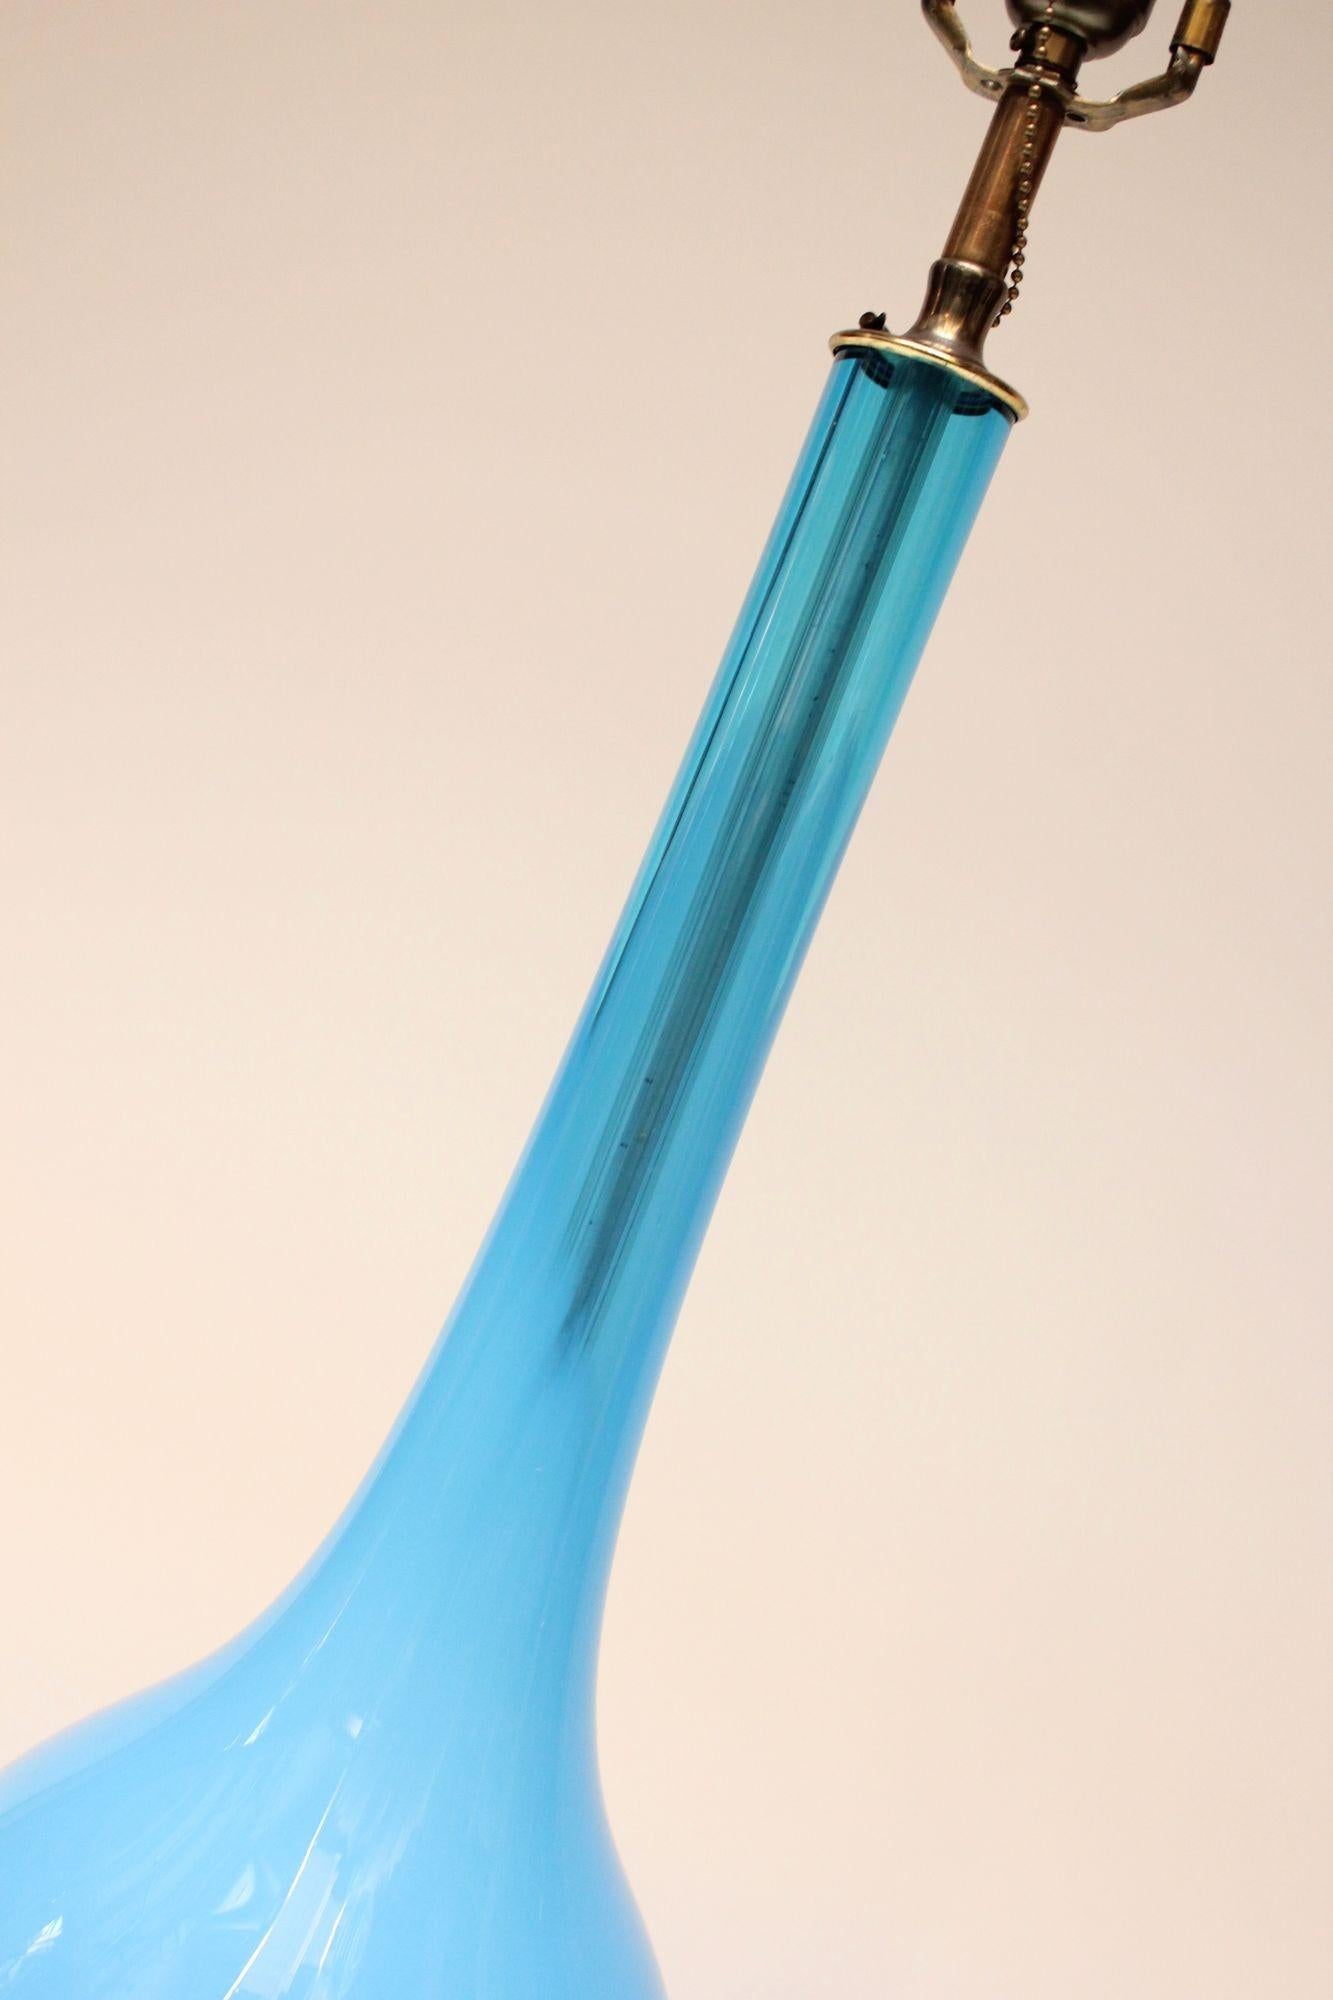 Mid-20th Century Midcentury Italian Modern Turquoise Blown Glass Lamp on Brass Base For Sale